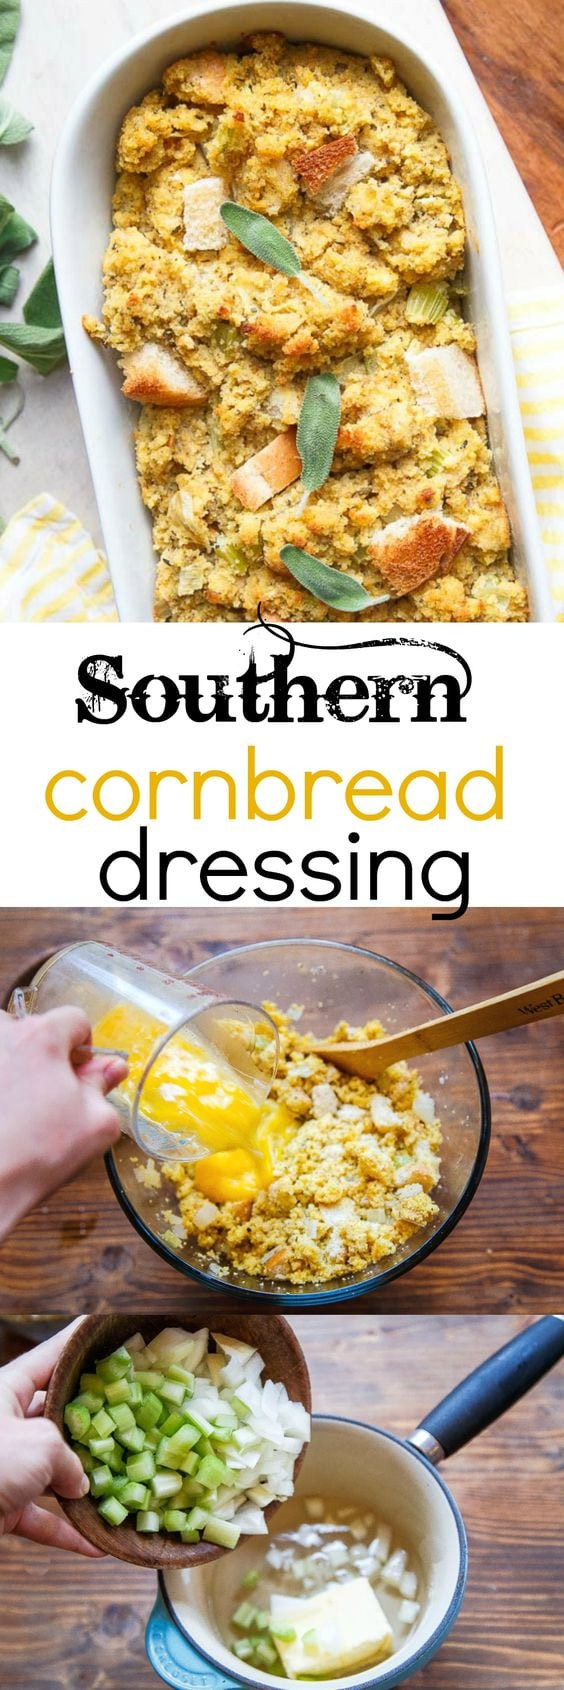 Cornbread Dressing Southern Living
 Southern Cornbread Dressing Recipe Classic Southern Dressing